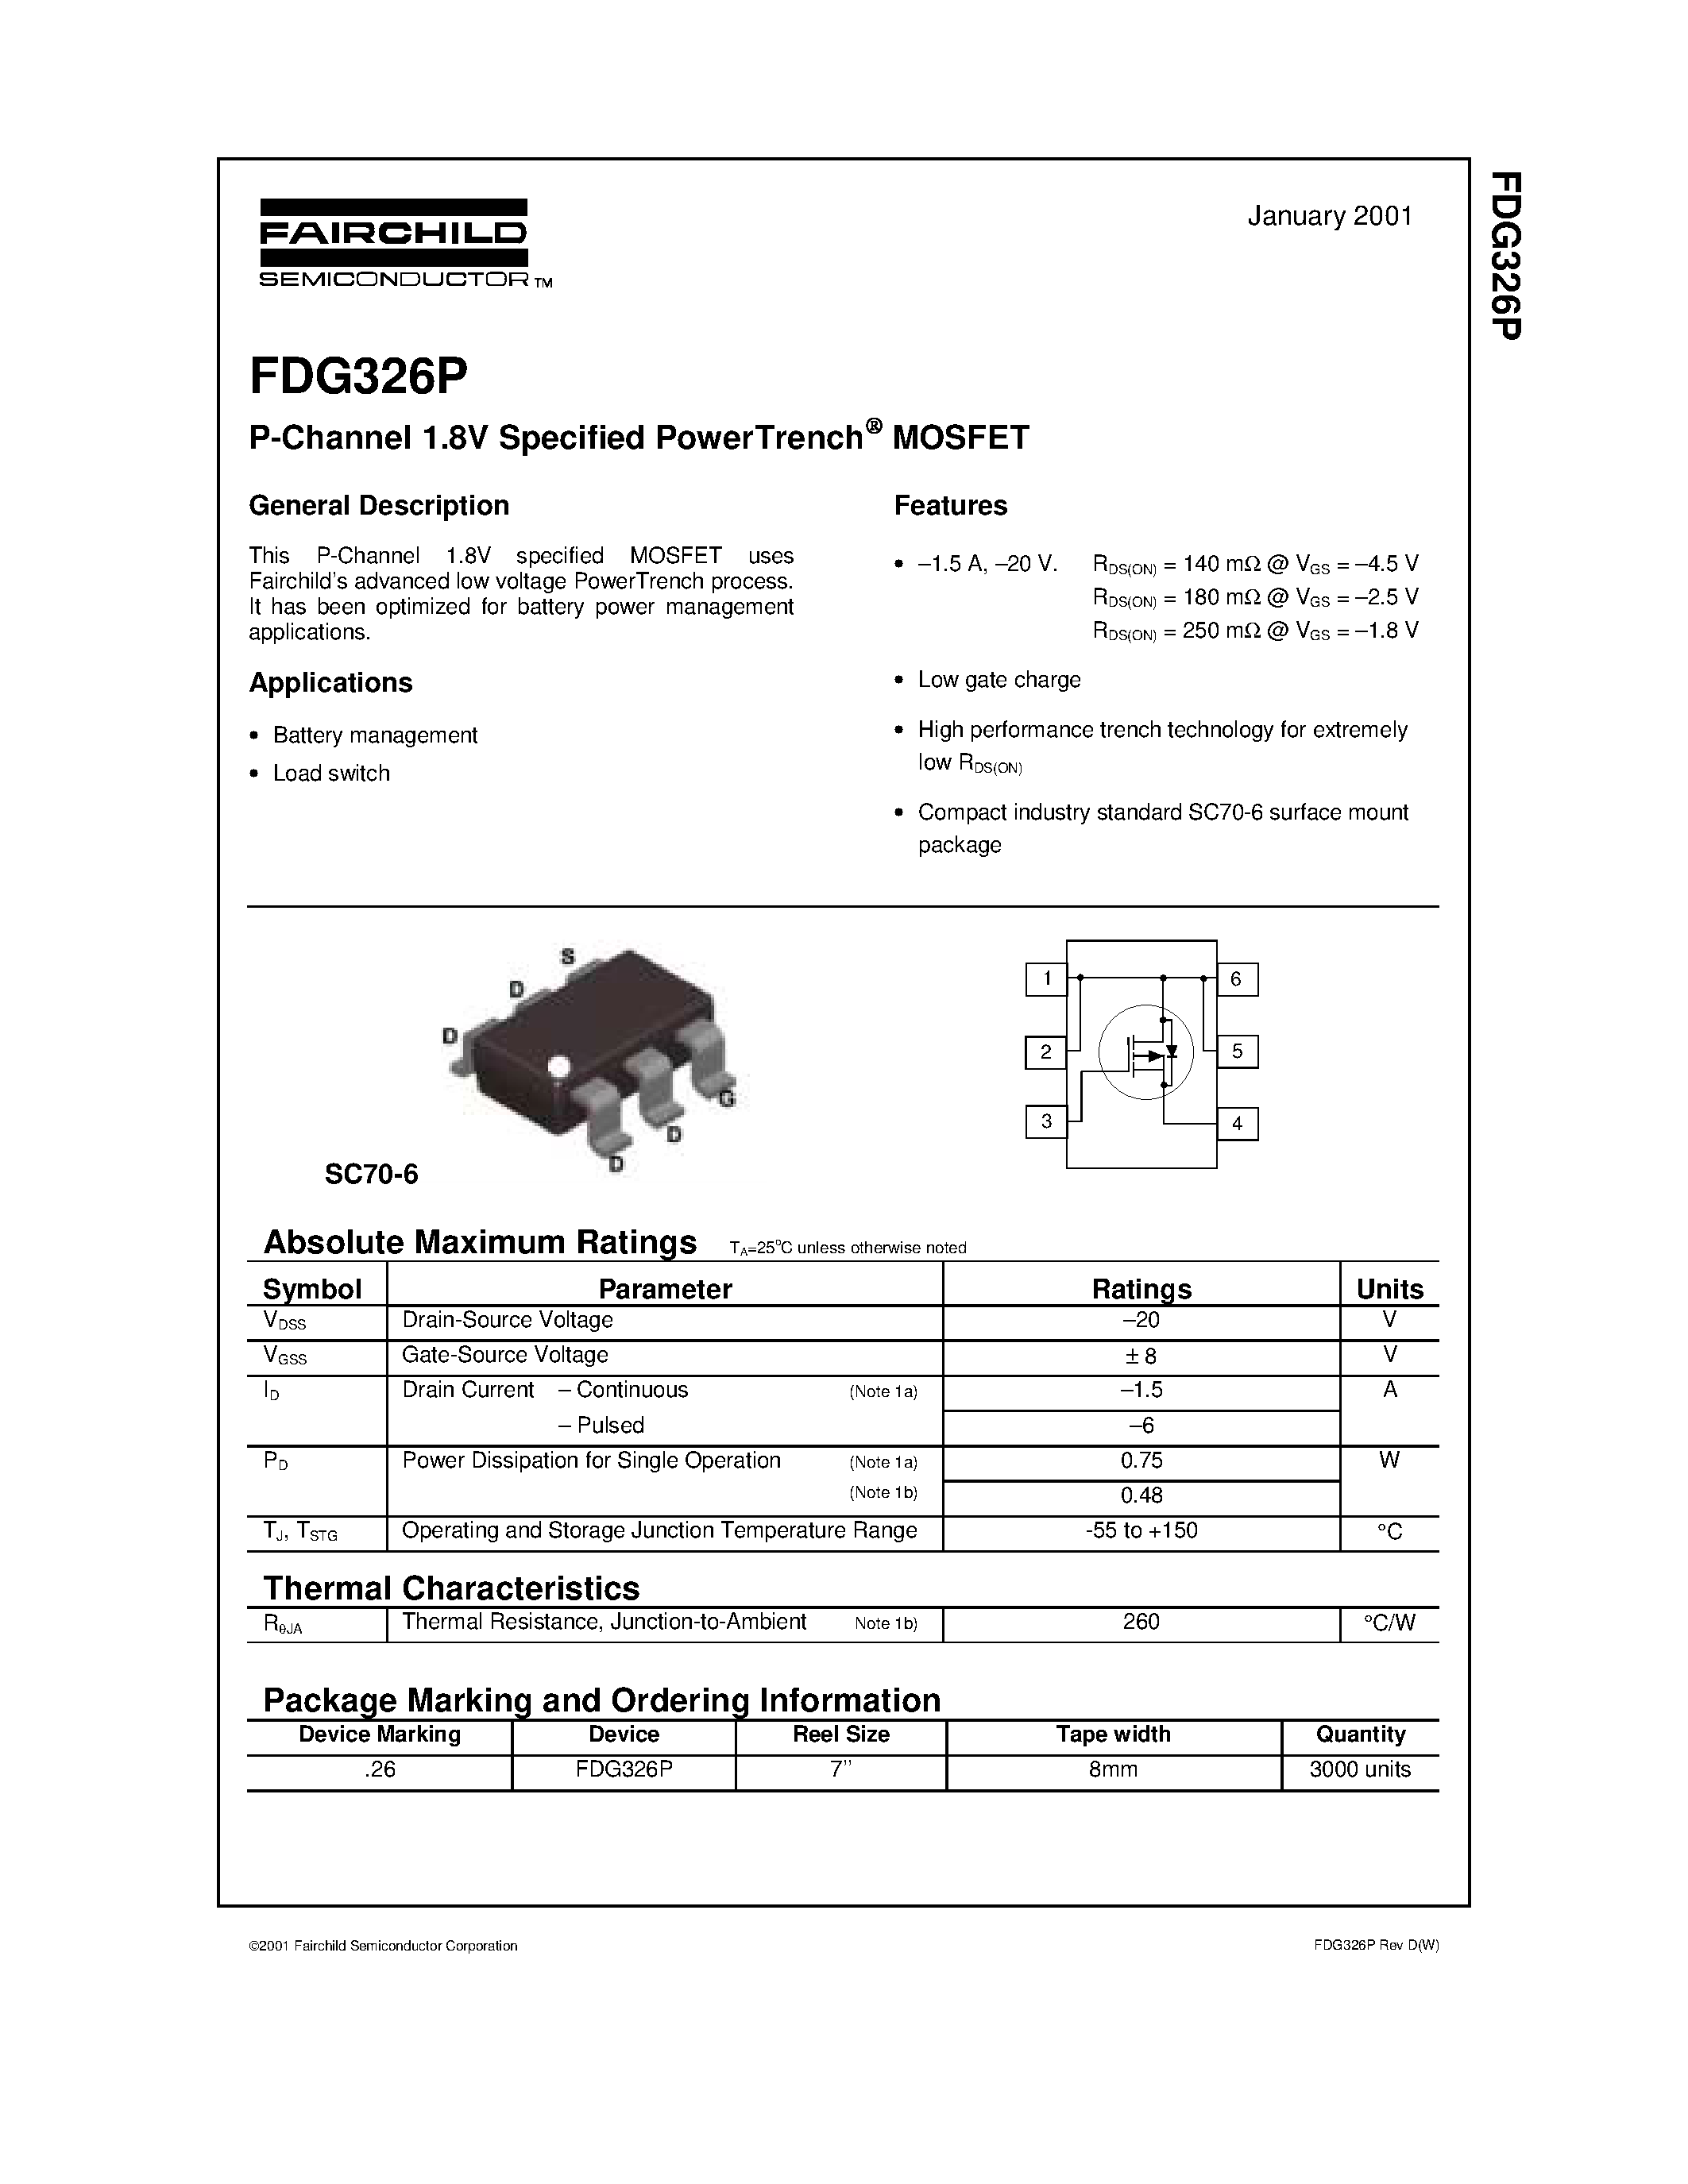 Datasheet FDG326 - P-Channel 1.8V Specified PowerTrench MOSFET page 1